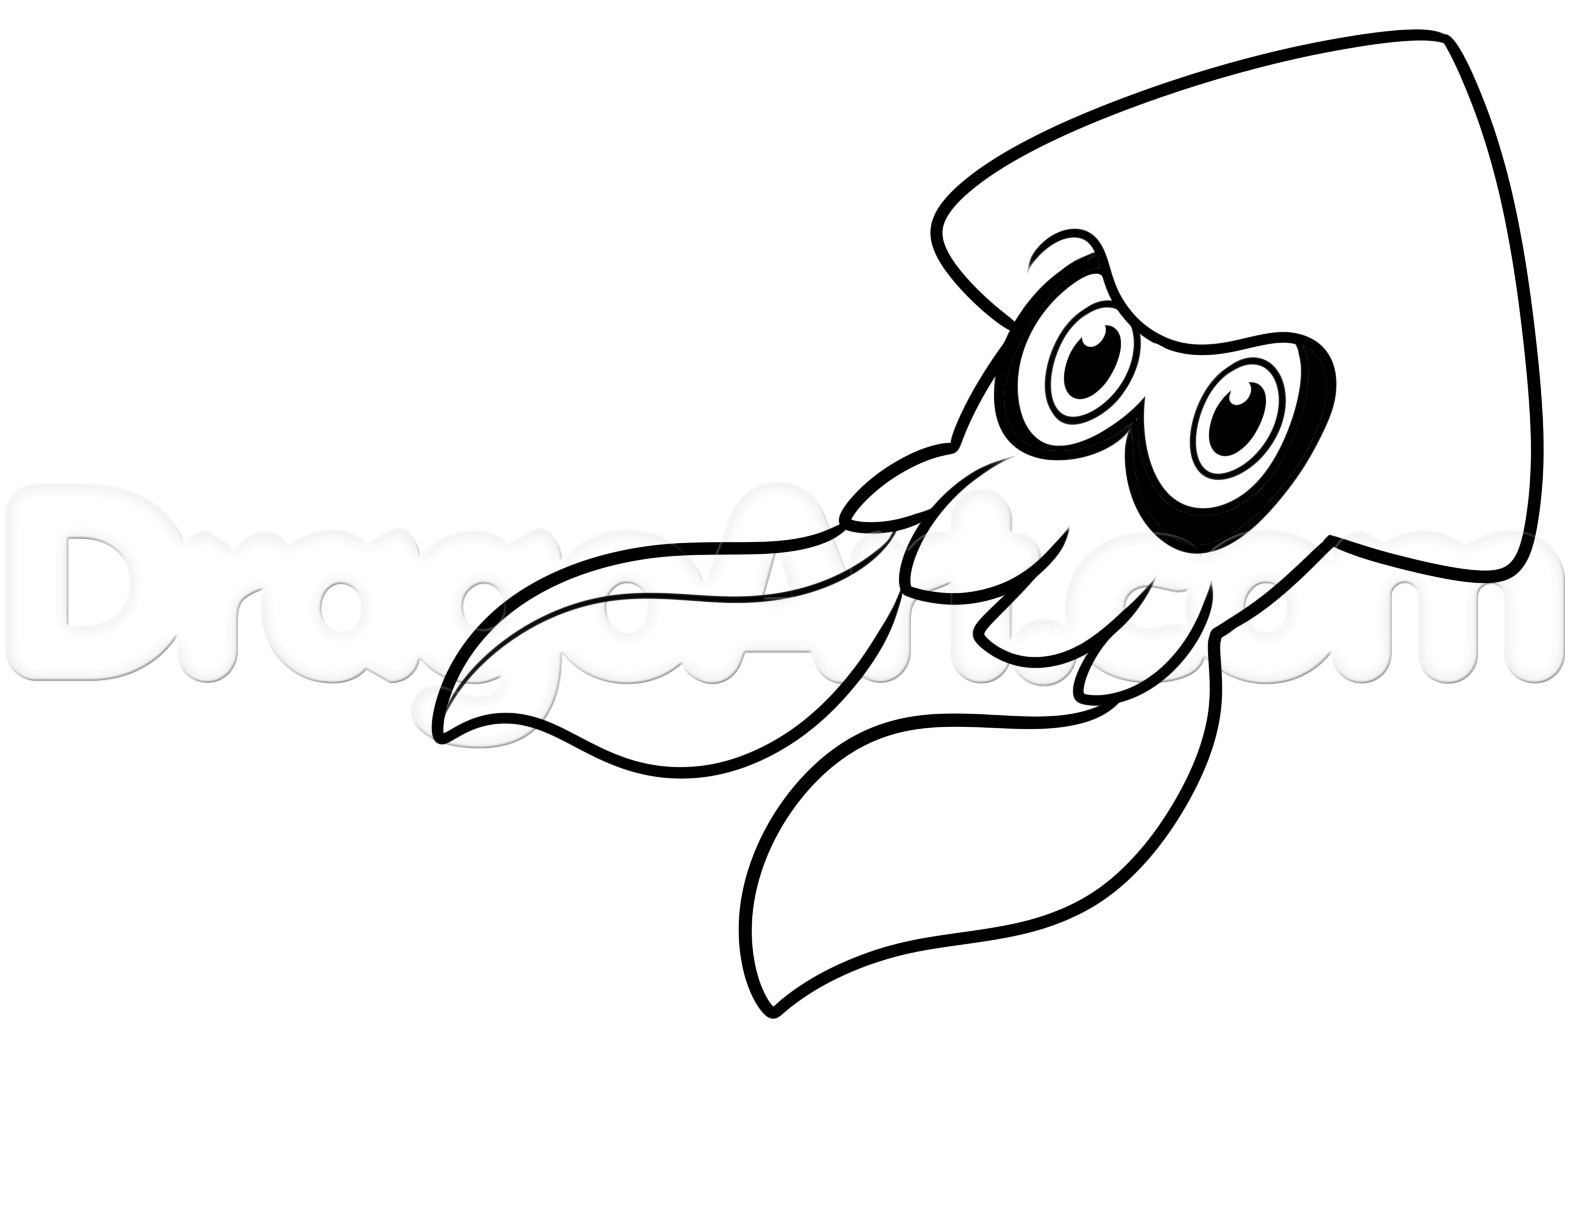 Splatoon Coloring Pages For Boys
 How to Draw Blue Squid from Splatoon Step by Step Video